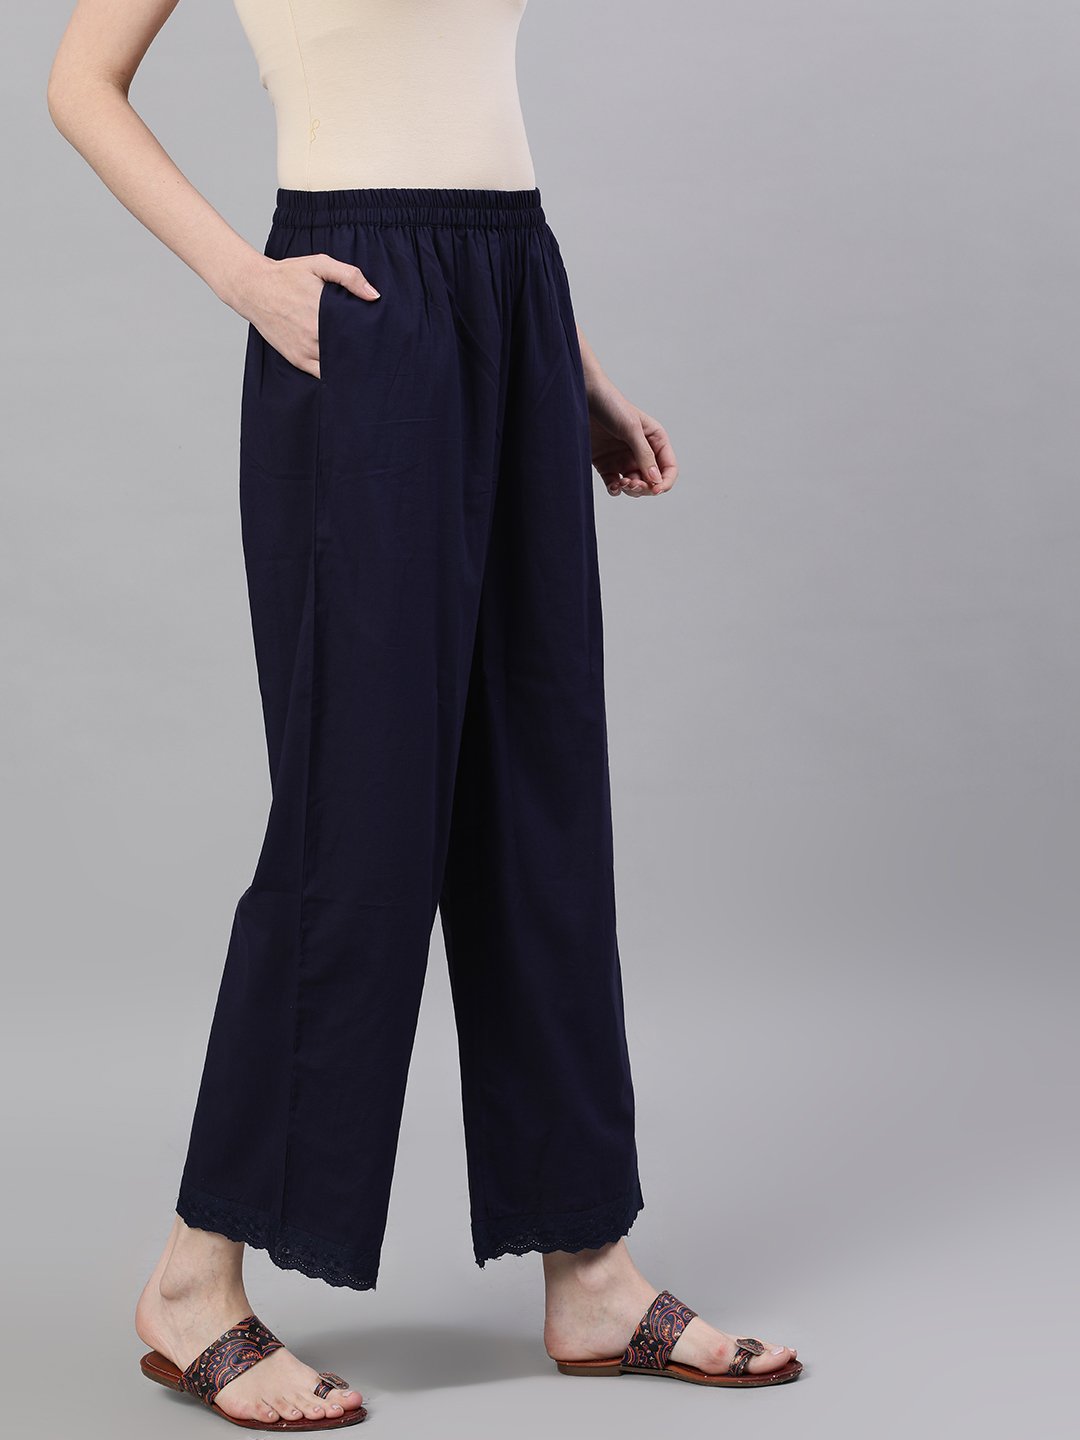 Women's Navy Blue Trouser With Lace Detailing - Nayo Clothing